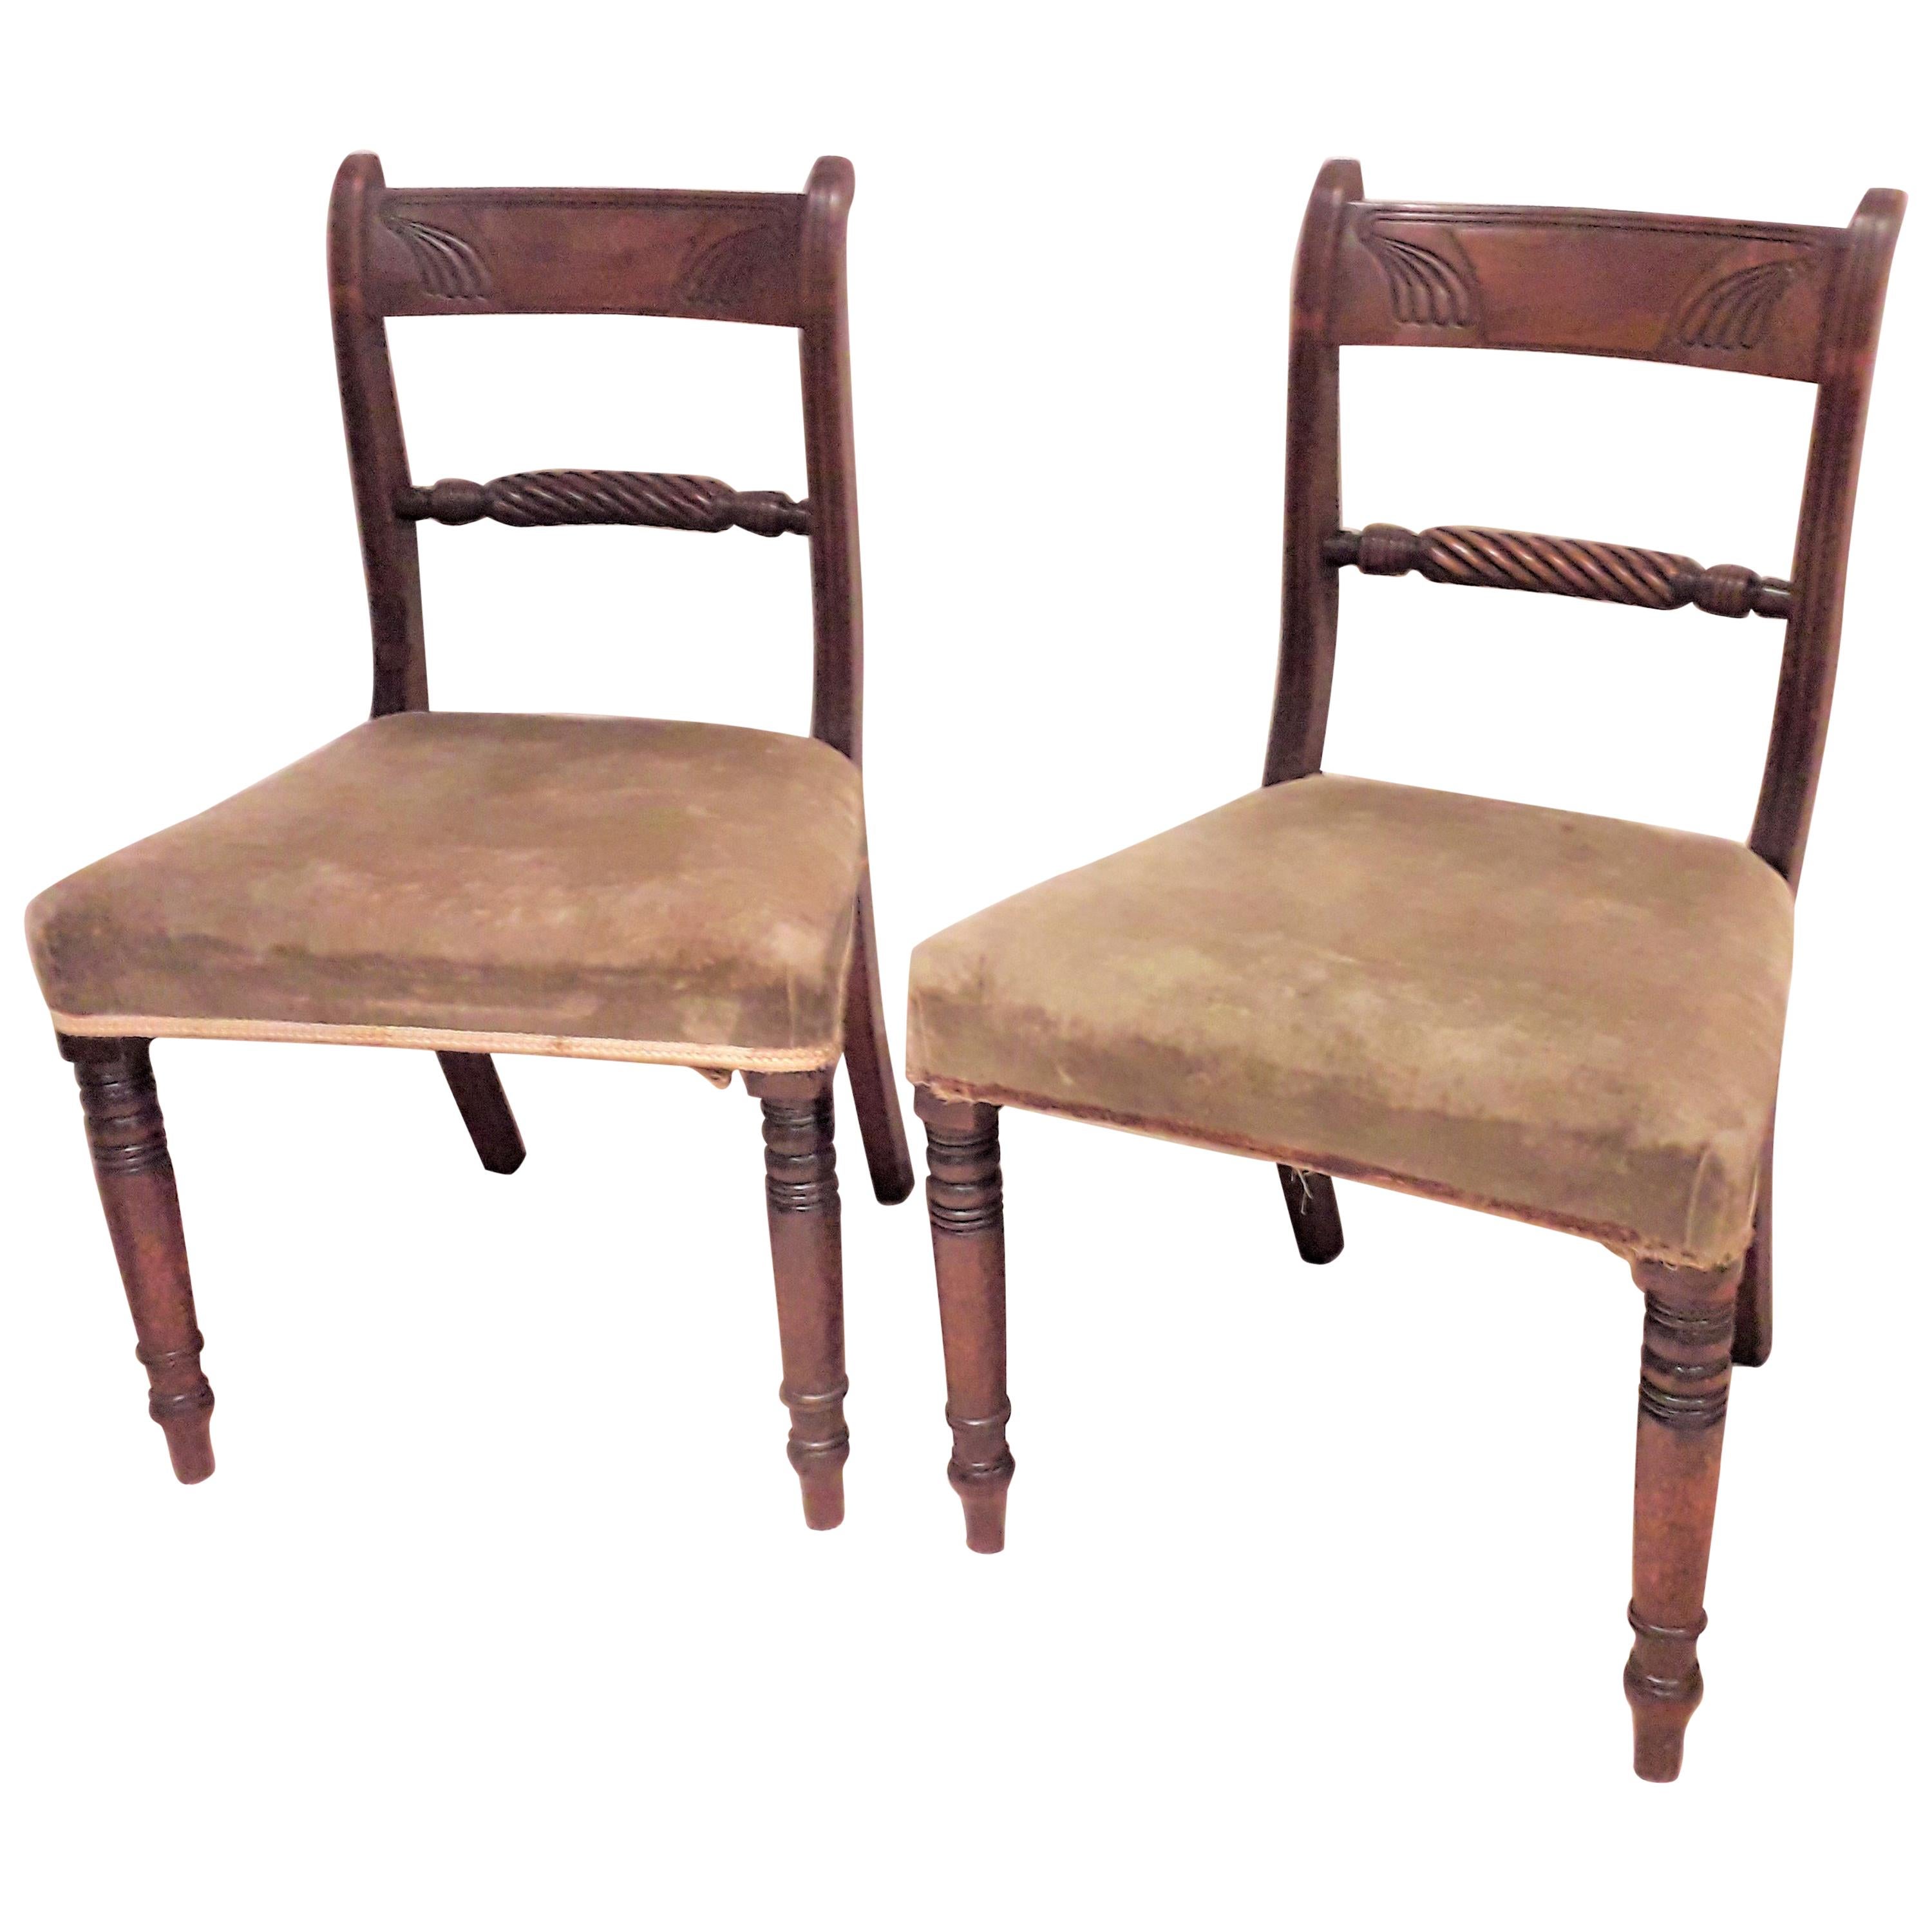 Pair of Regency Mahogany Carved Side Chairs, 19th Century, European 